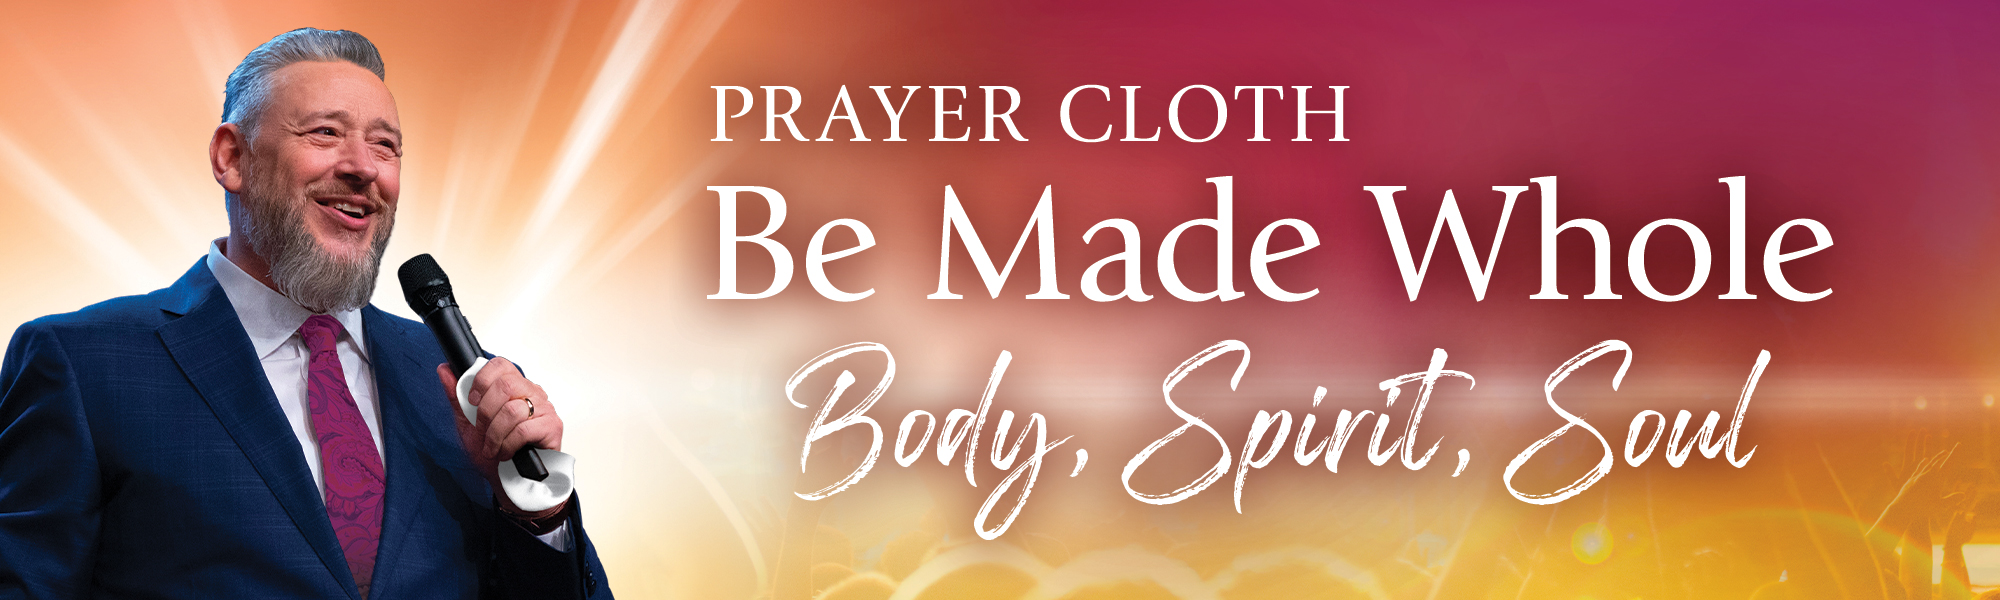 Request your prayer cloth!